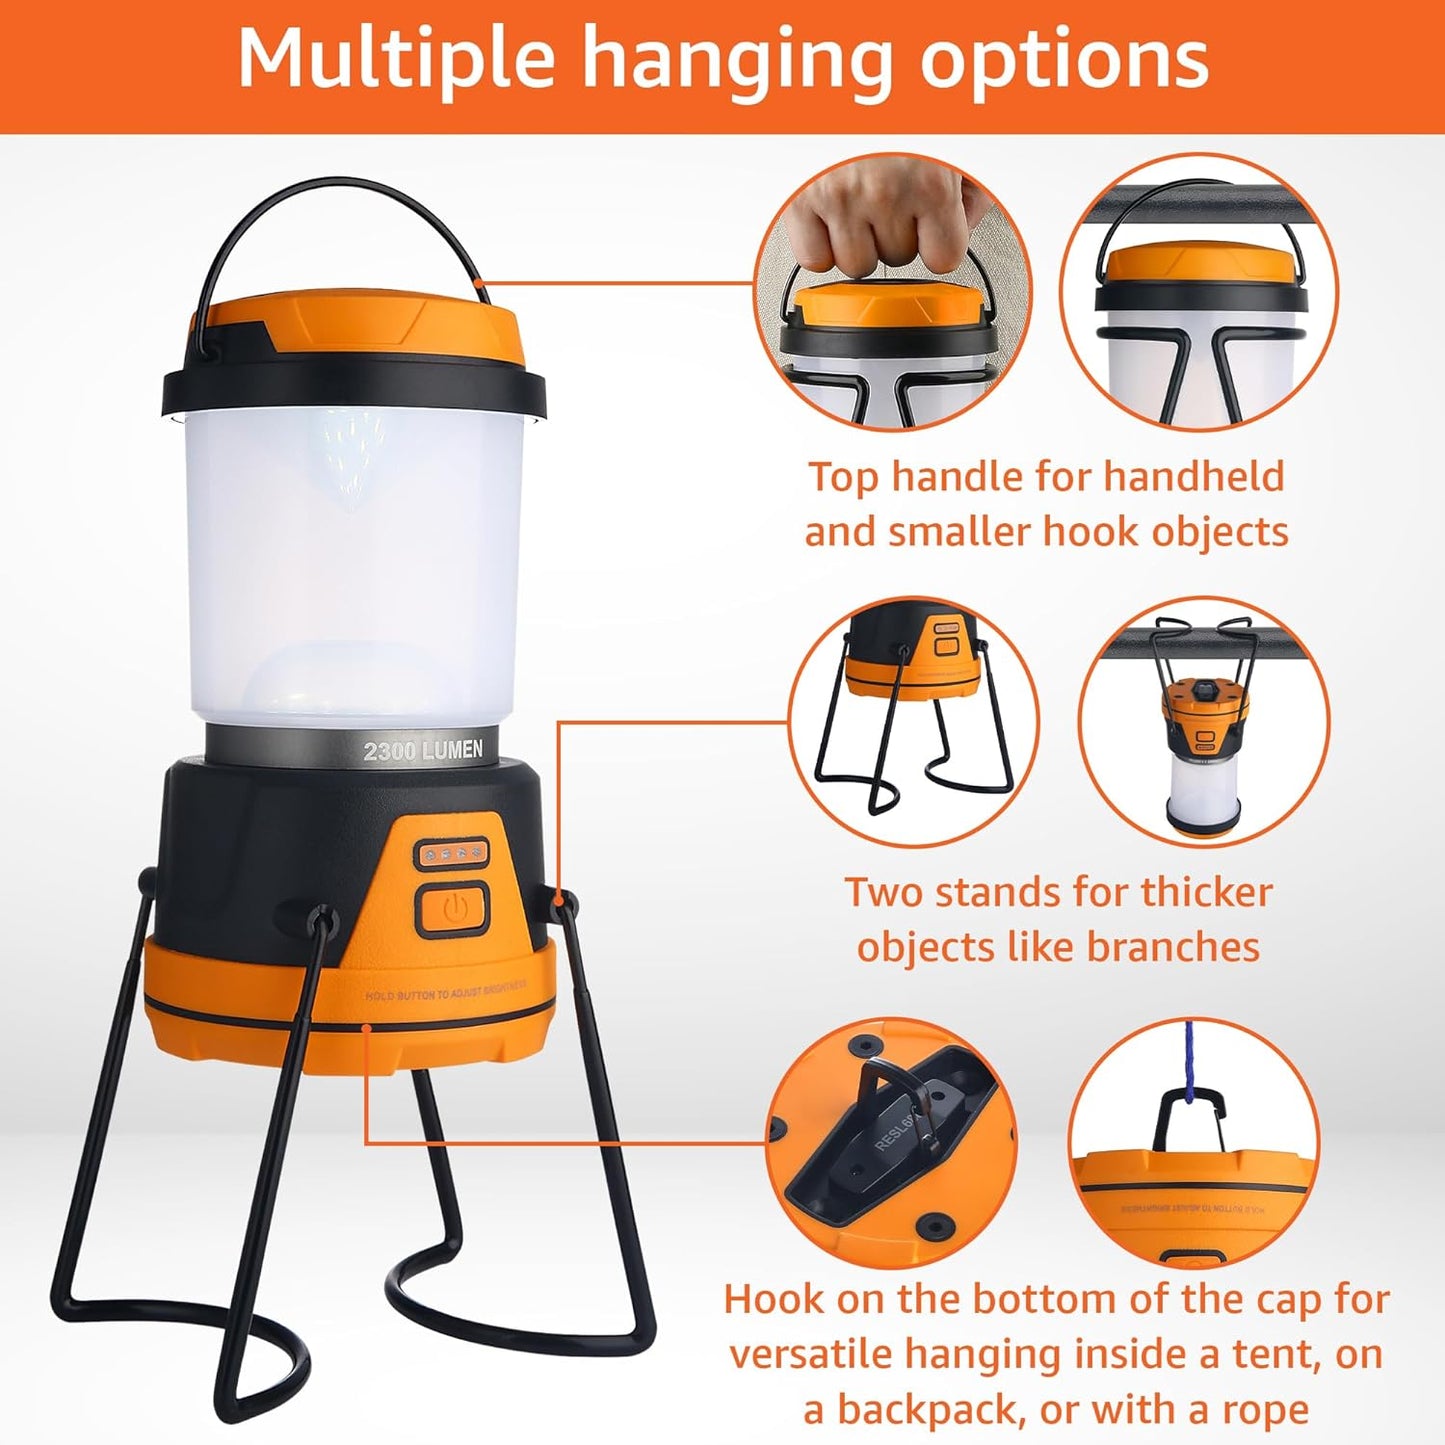 Rechargeable LED Camping Lantern - Power Outages, Hurricanes, Emergency, Hiking, Outdoor - Bright Battery Powered Electric Survival Light with Built-in Power Bank- Portable and Waterproof Camp Lantern